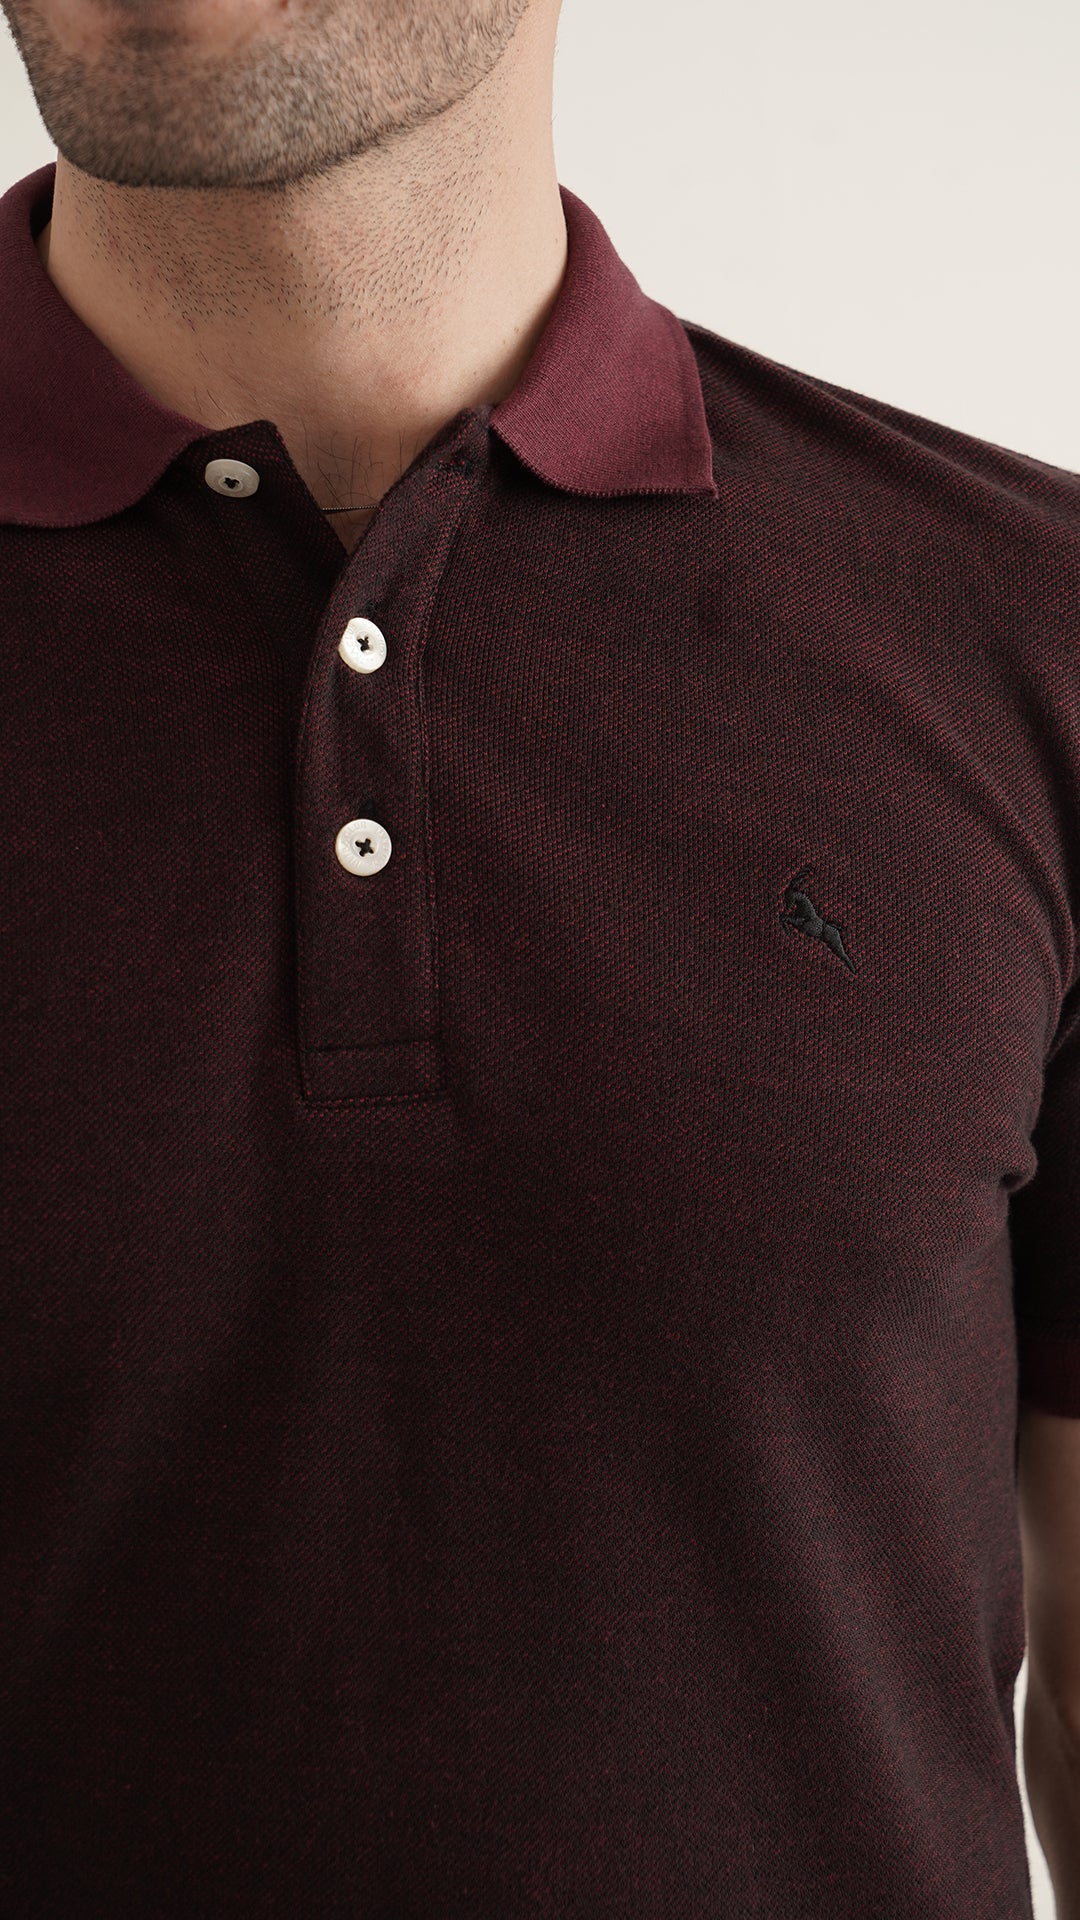 Markhor - Gold Series Red Yarn Dyed Polo